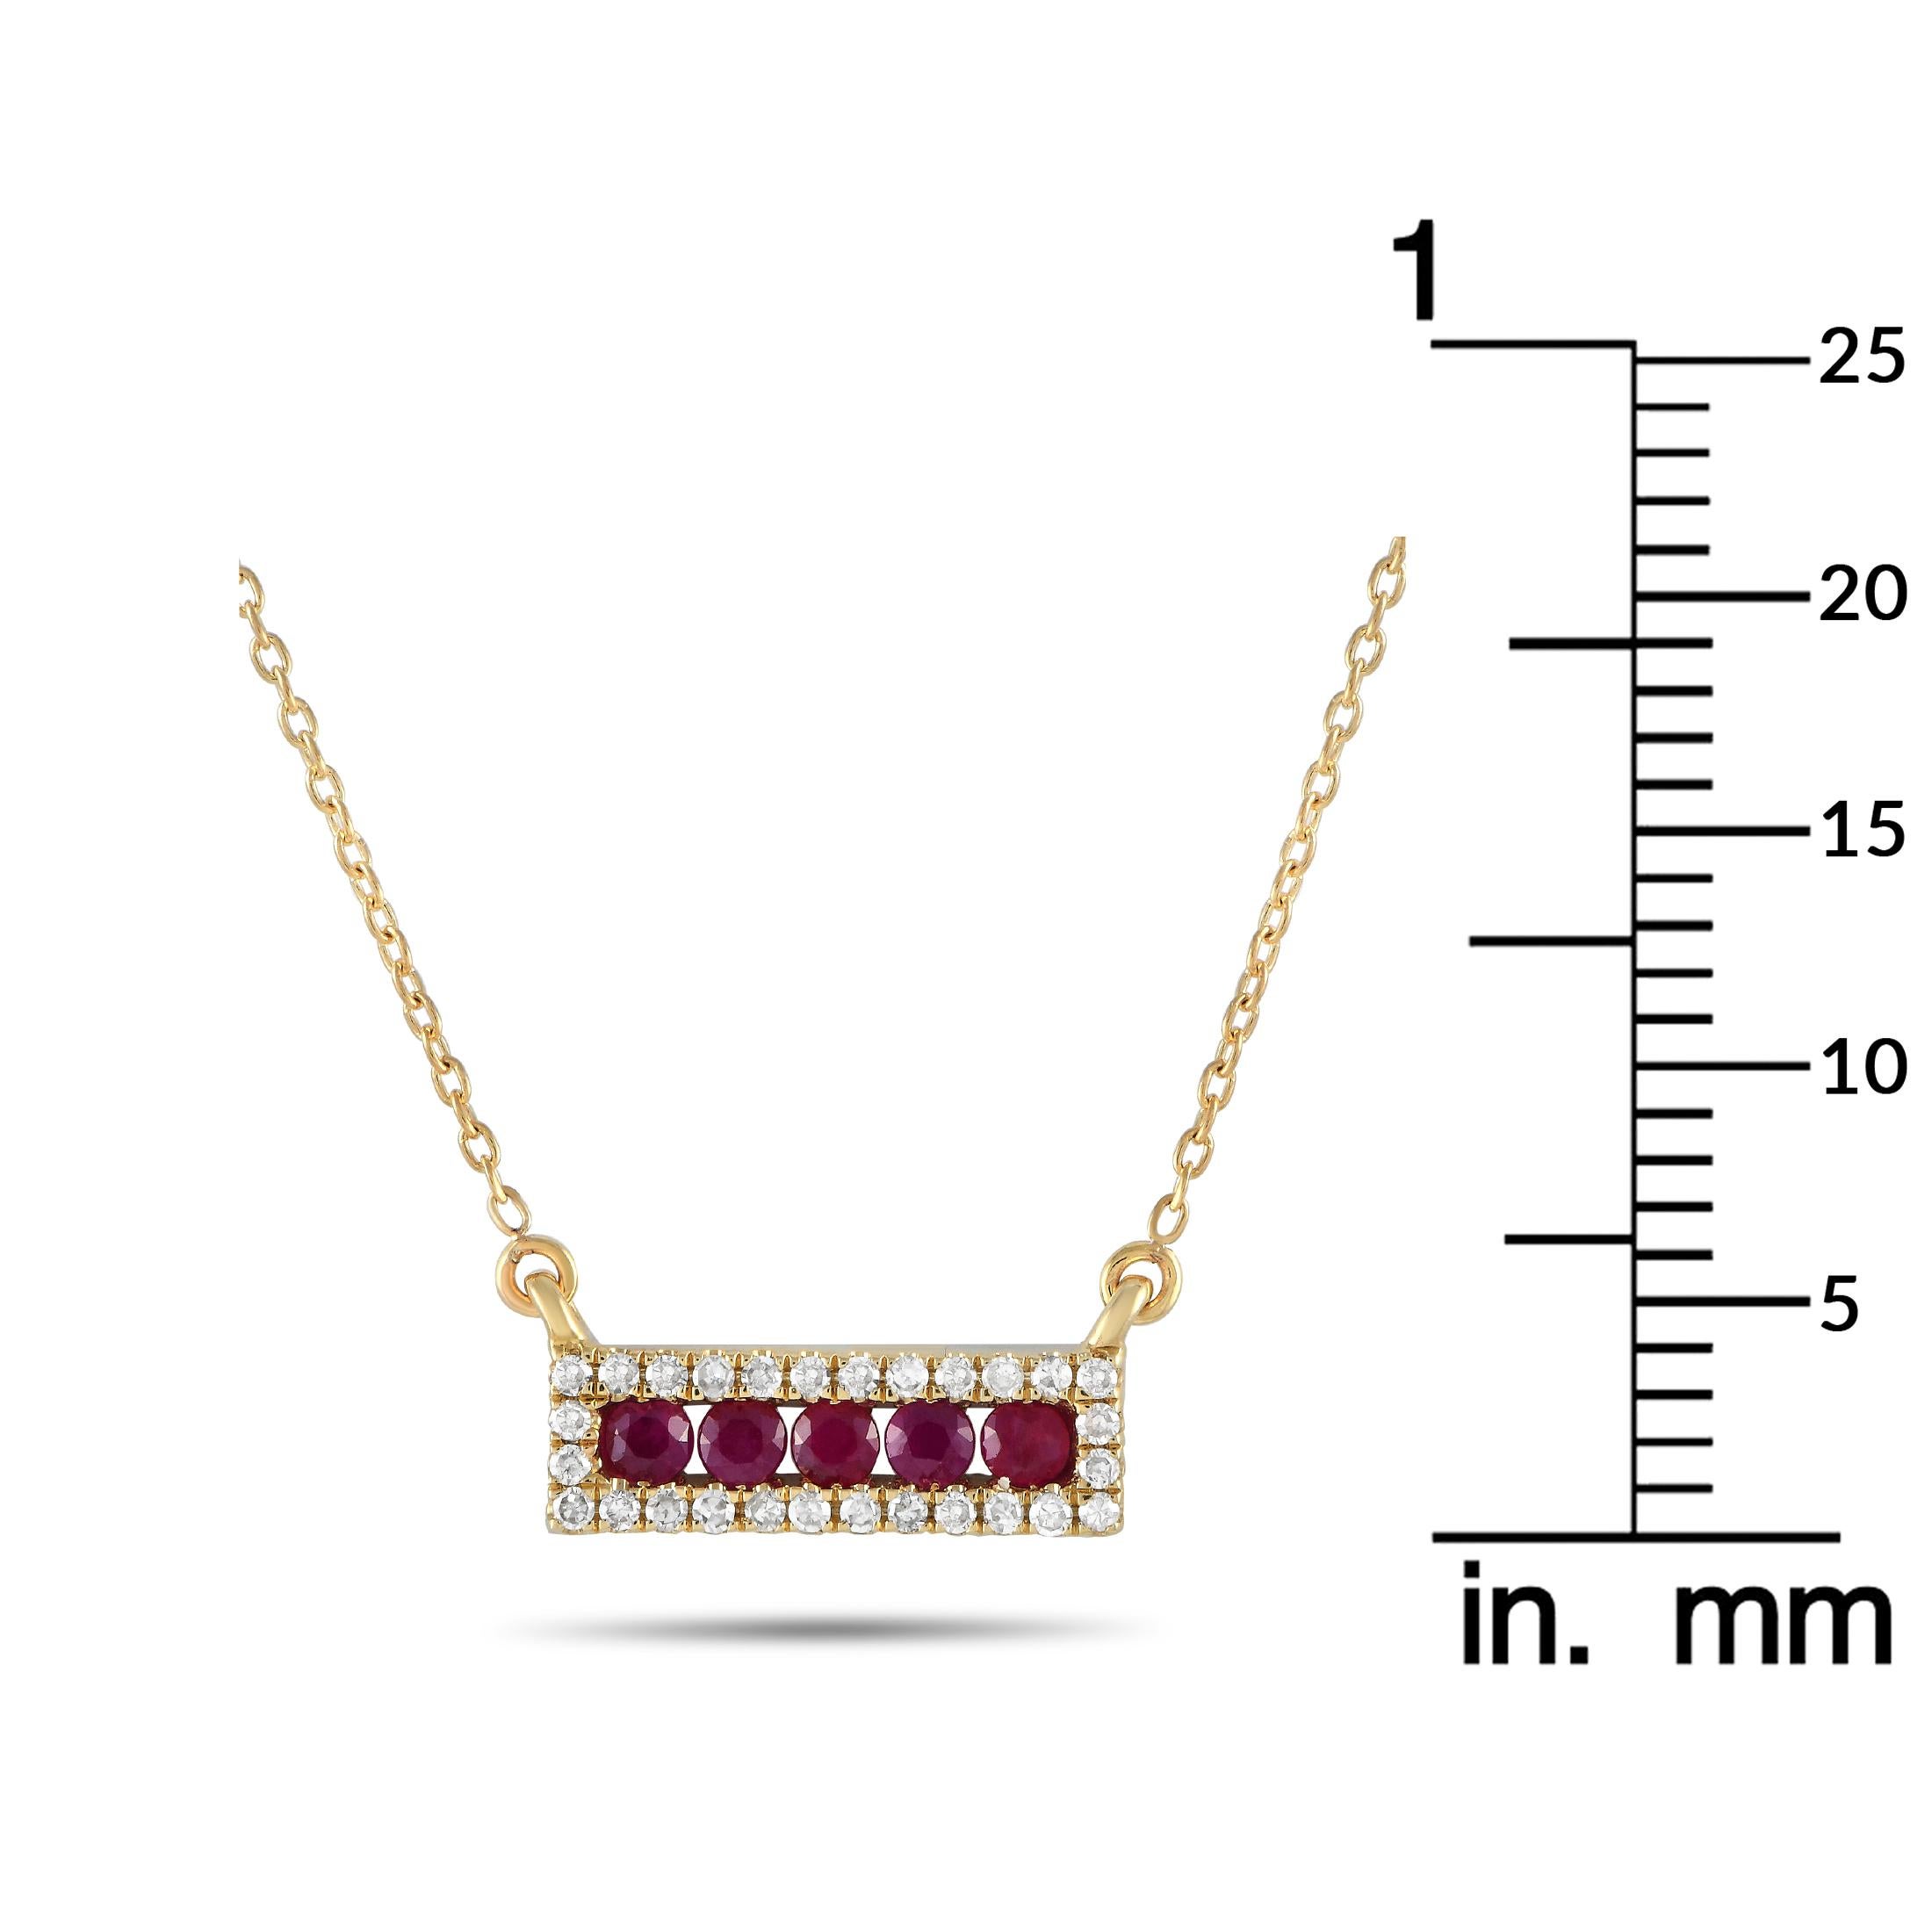 LB Exclusive 14K Yellow Gold 0.15ct Diamond & Ruby Pendant Necklace NK4-14783YRU In New Condition For Sale In Southampton, PA